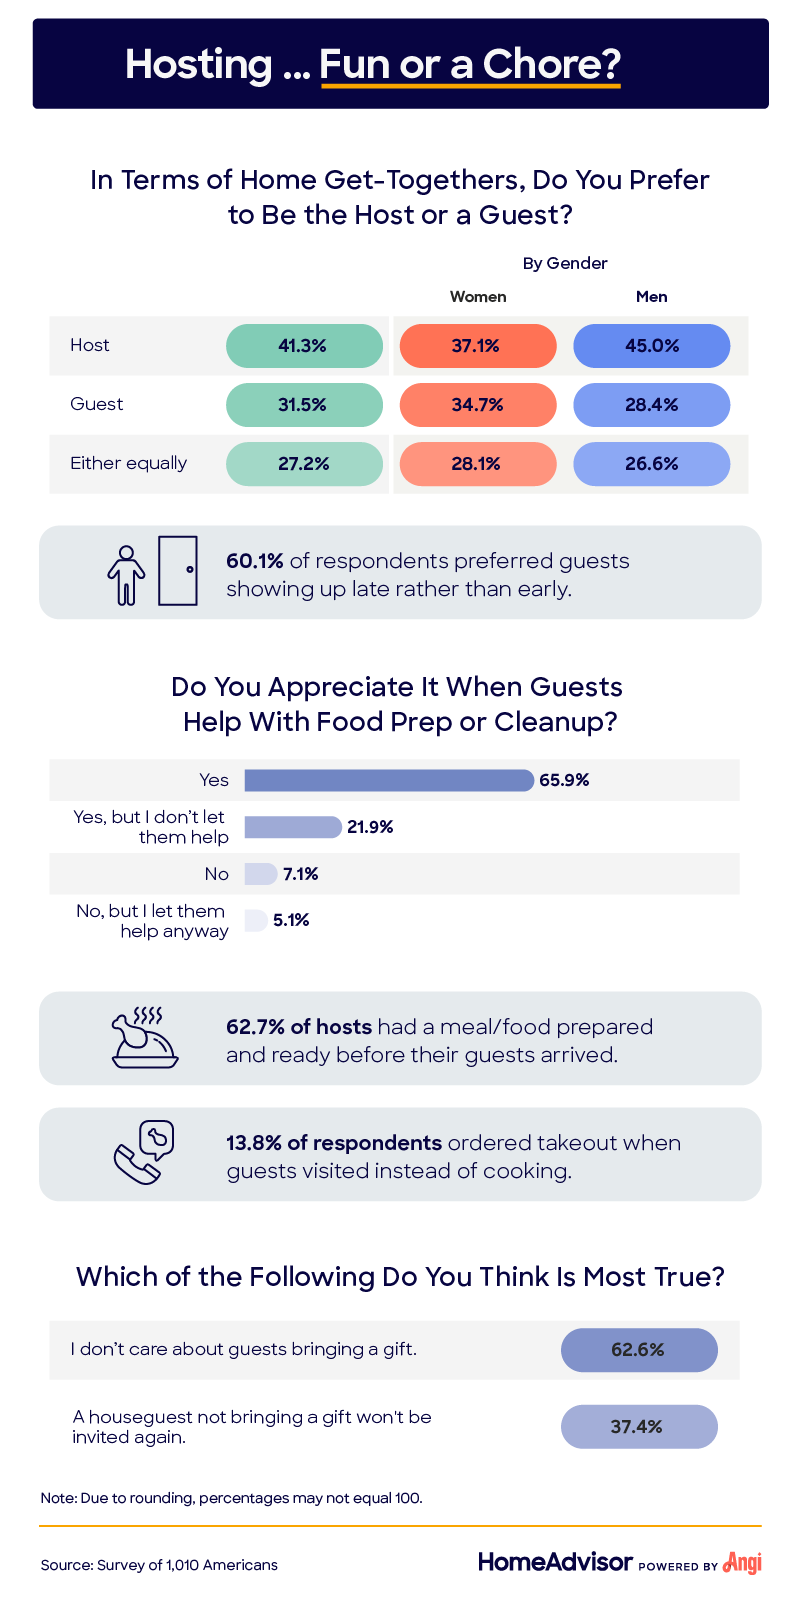 Survey respondents answer whether they prefer to be a host or a guest